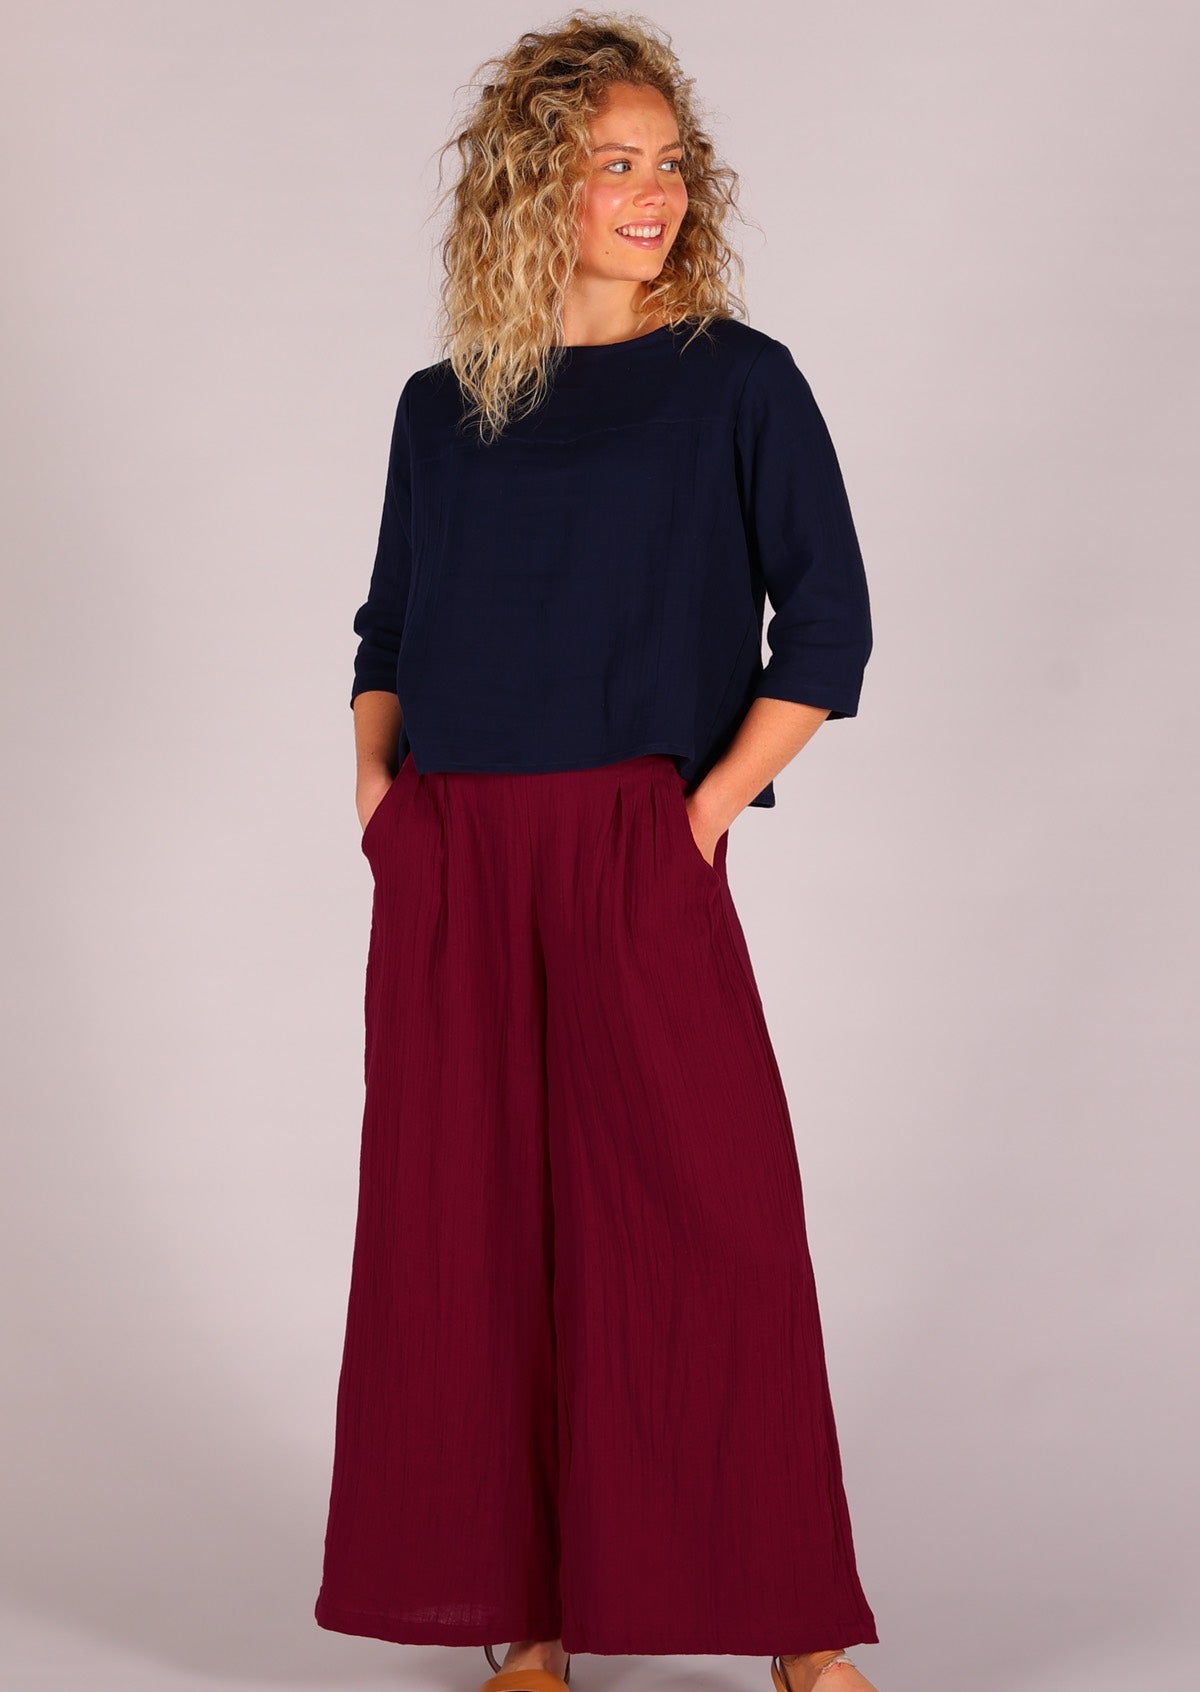 Double cotton wide leg pants with flat front of waistband and elastic at the back